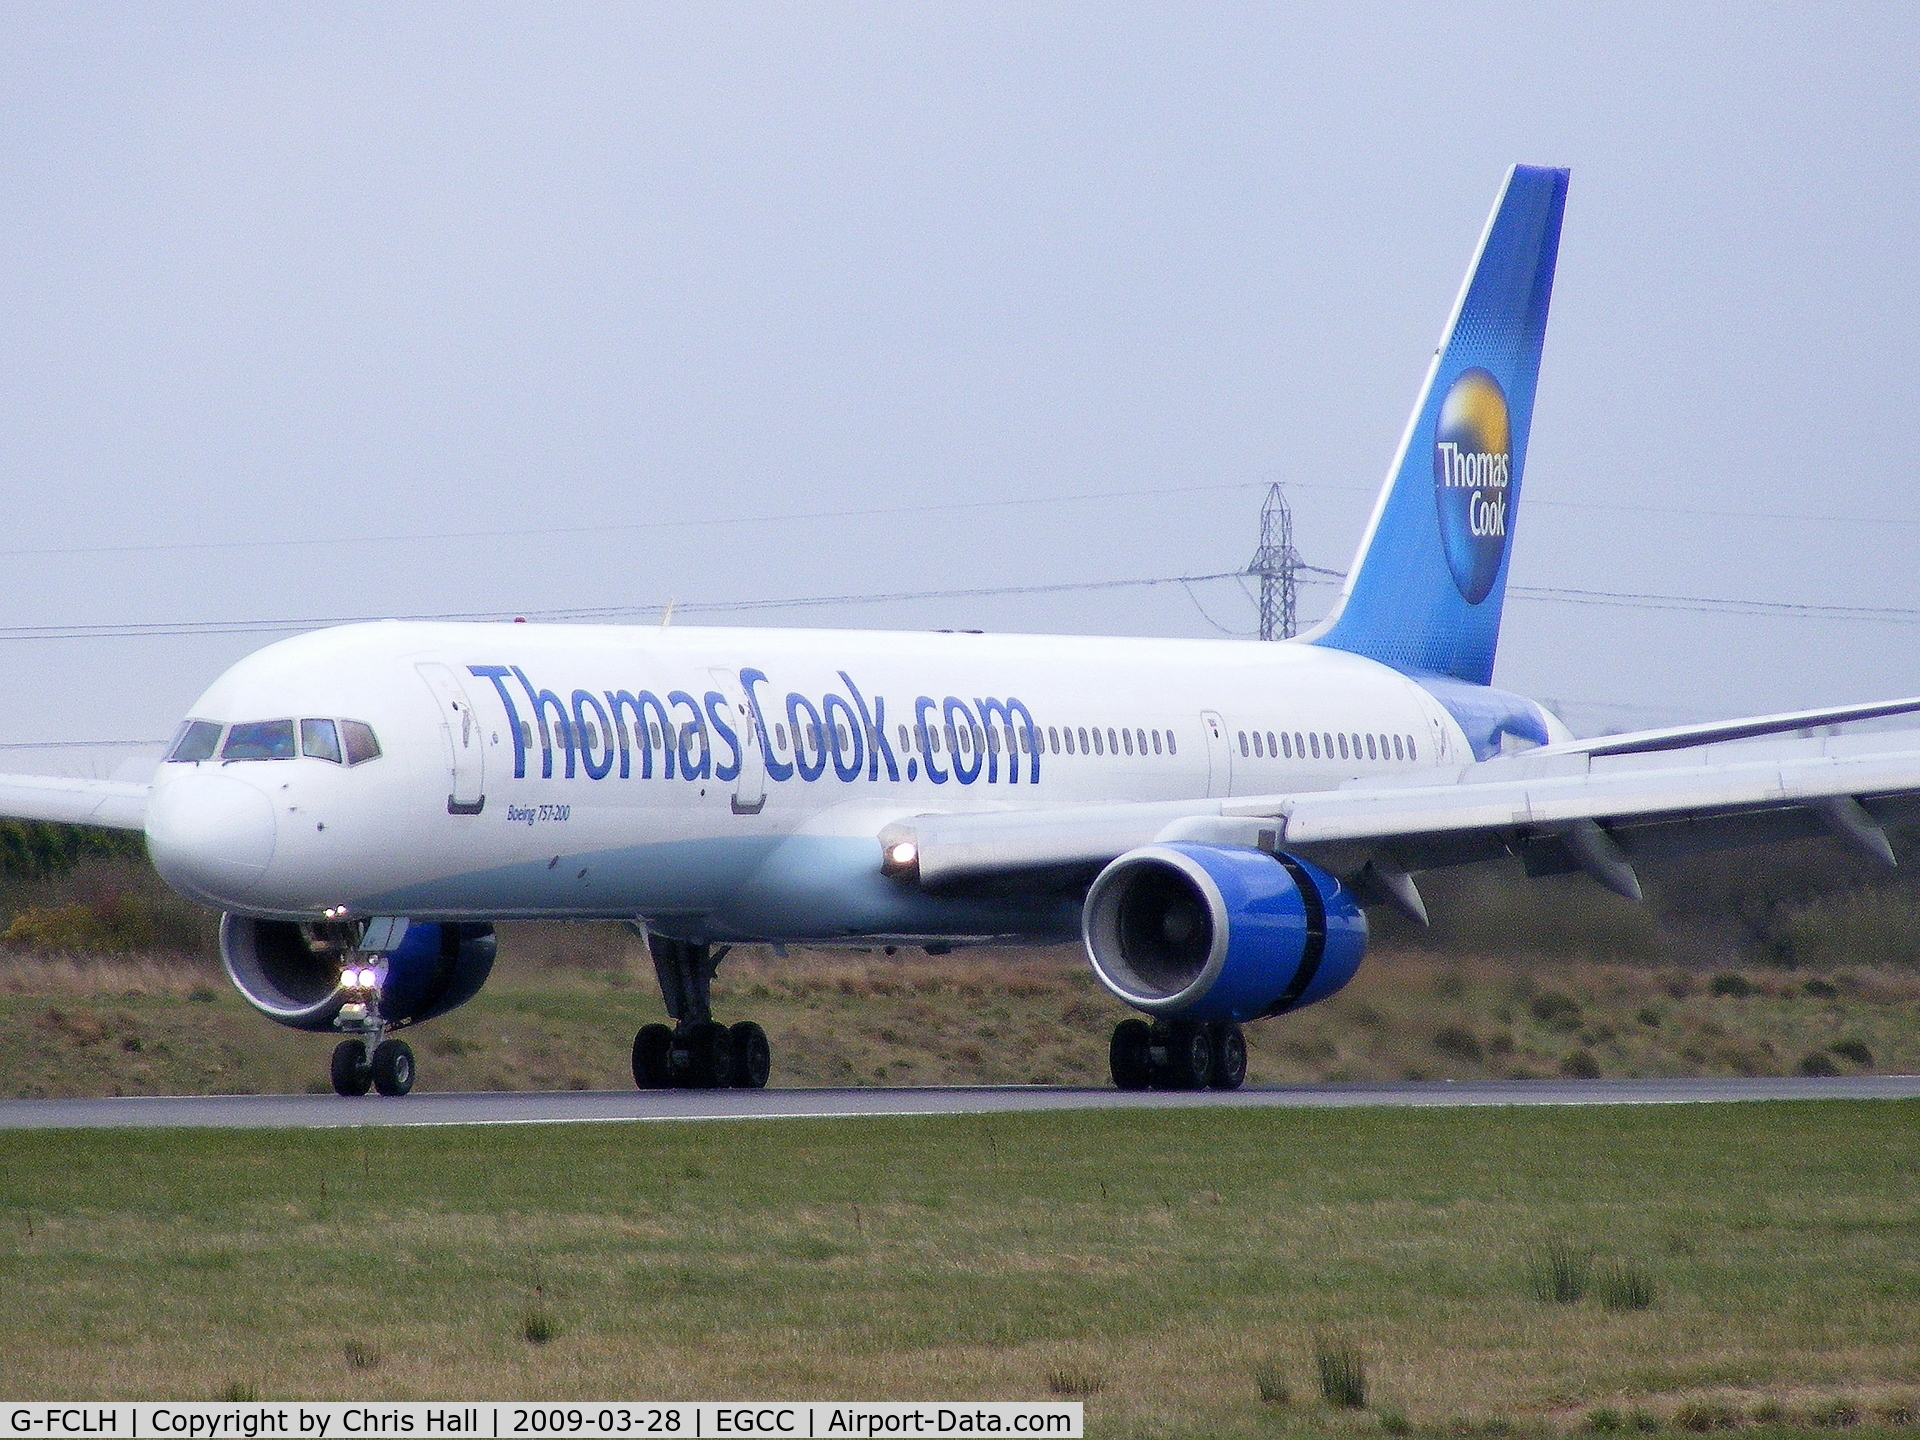 G-FCLH, 1995 Boeing 757-28A C/N 26274, Thomas Cook